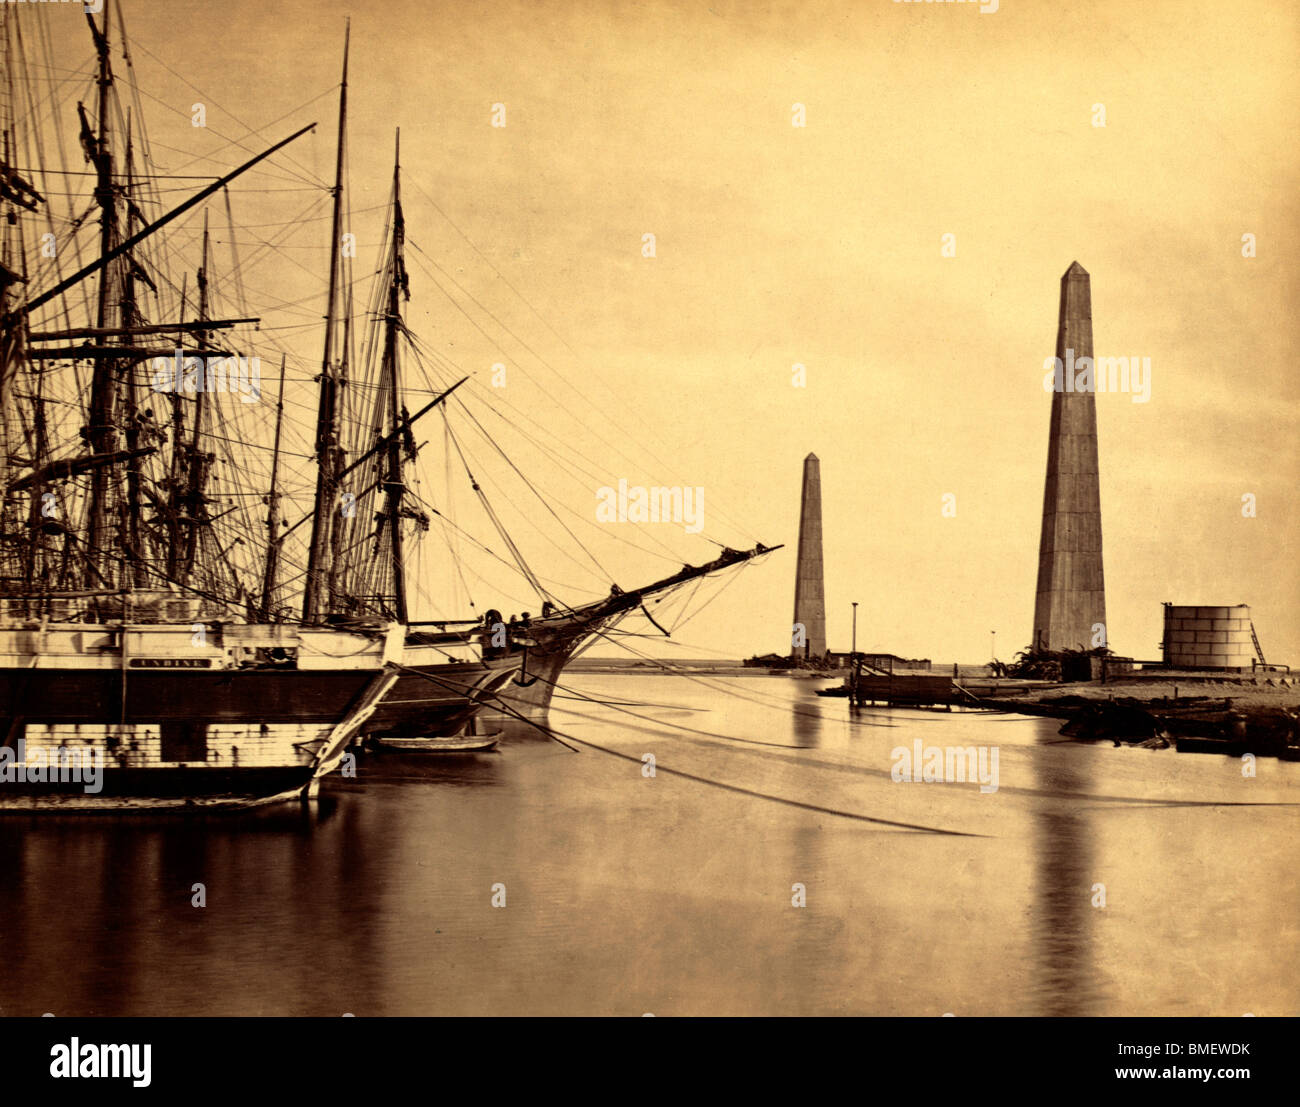 Suez canal entrance at Port Said - Obelisks on shore and ships moored at Port Said, the entrance to the Suez Canal. circa 1860 Stock Photo